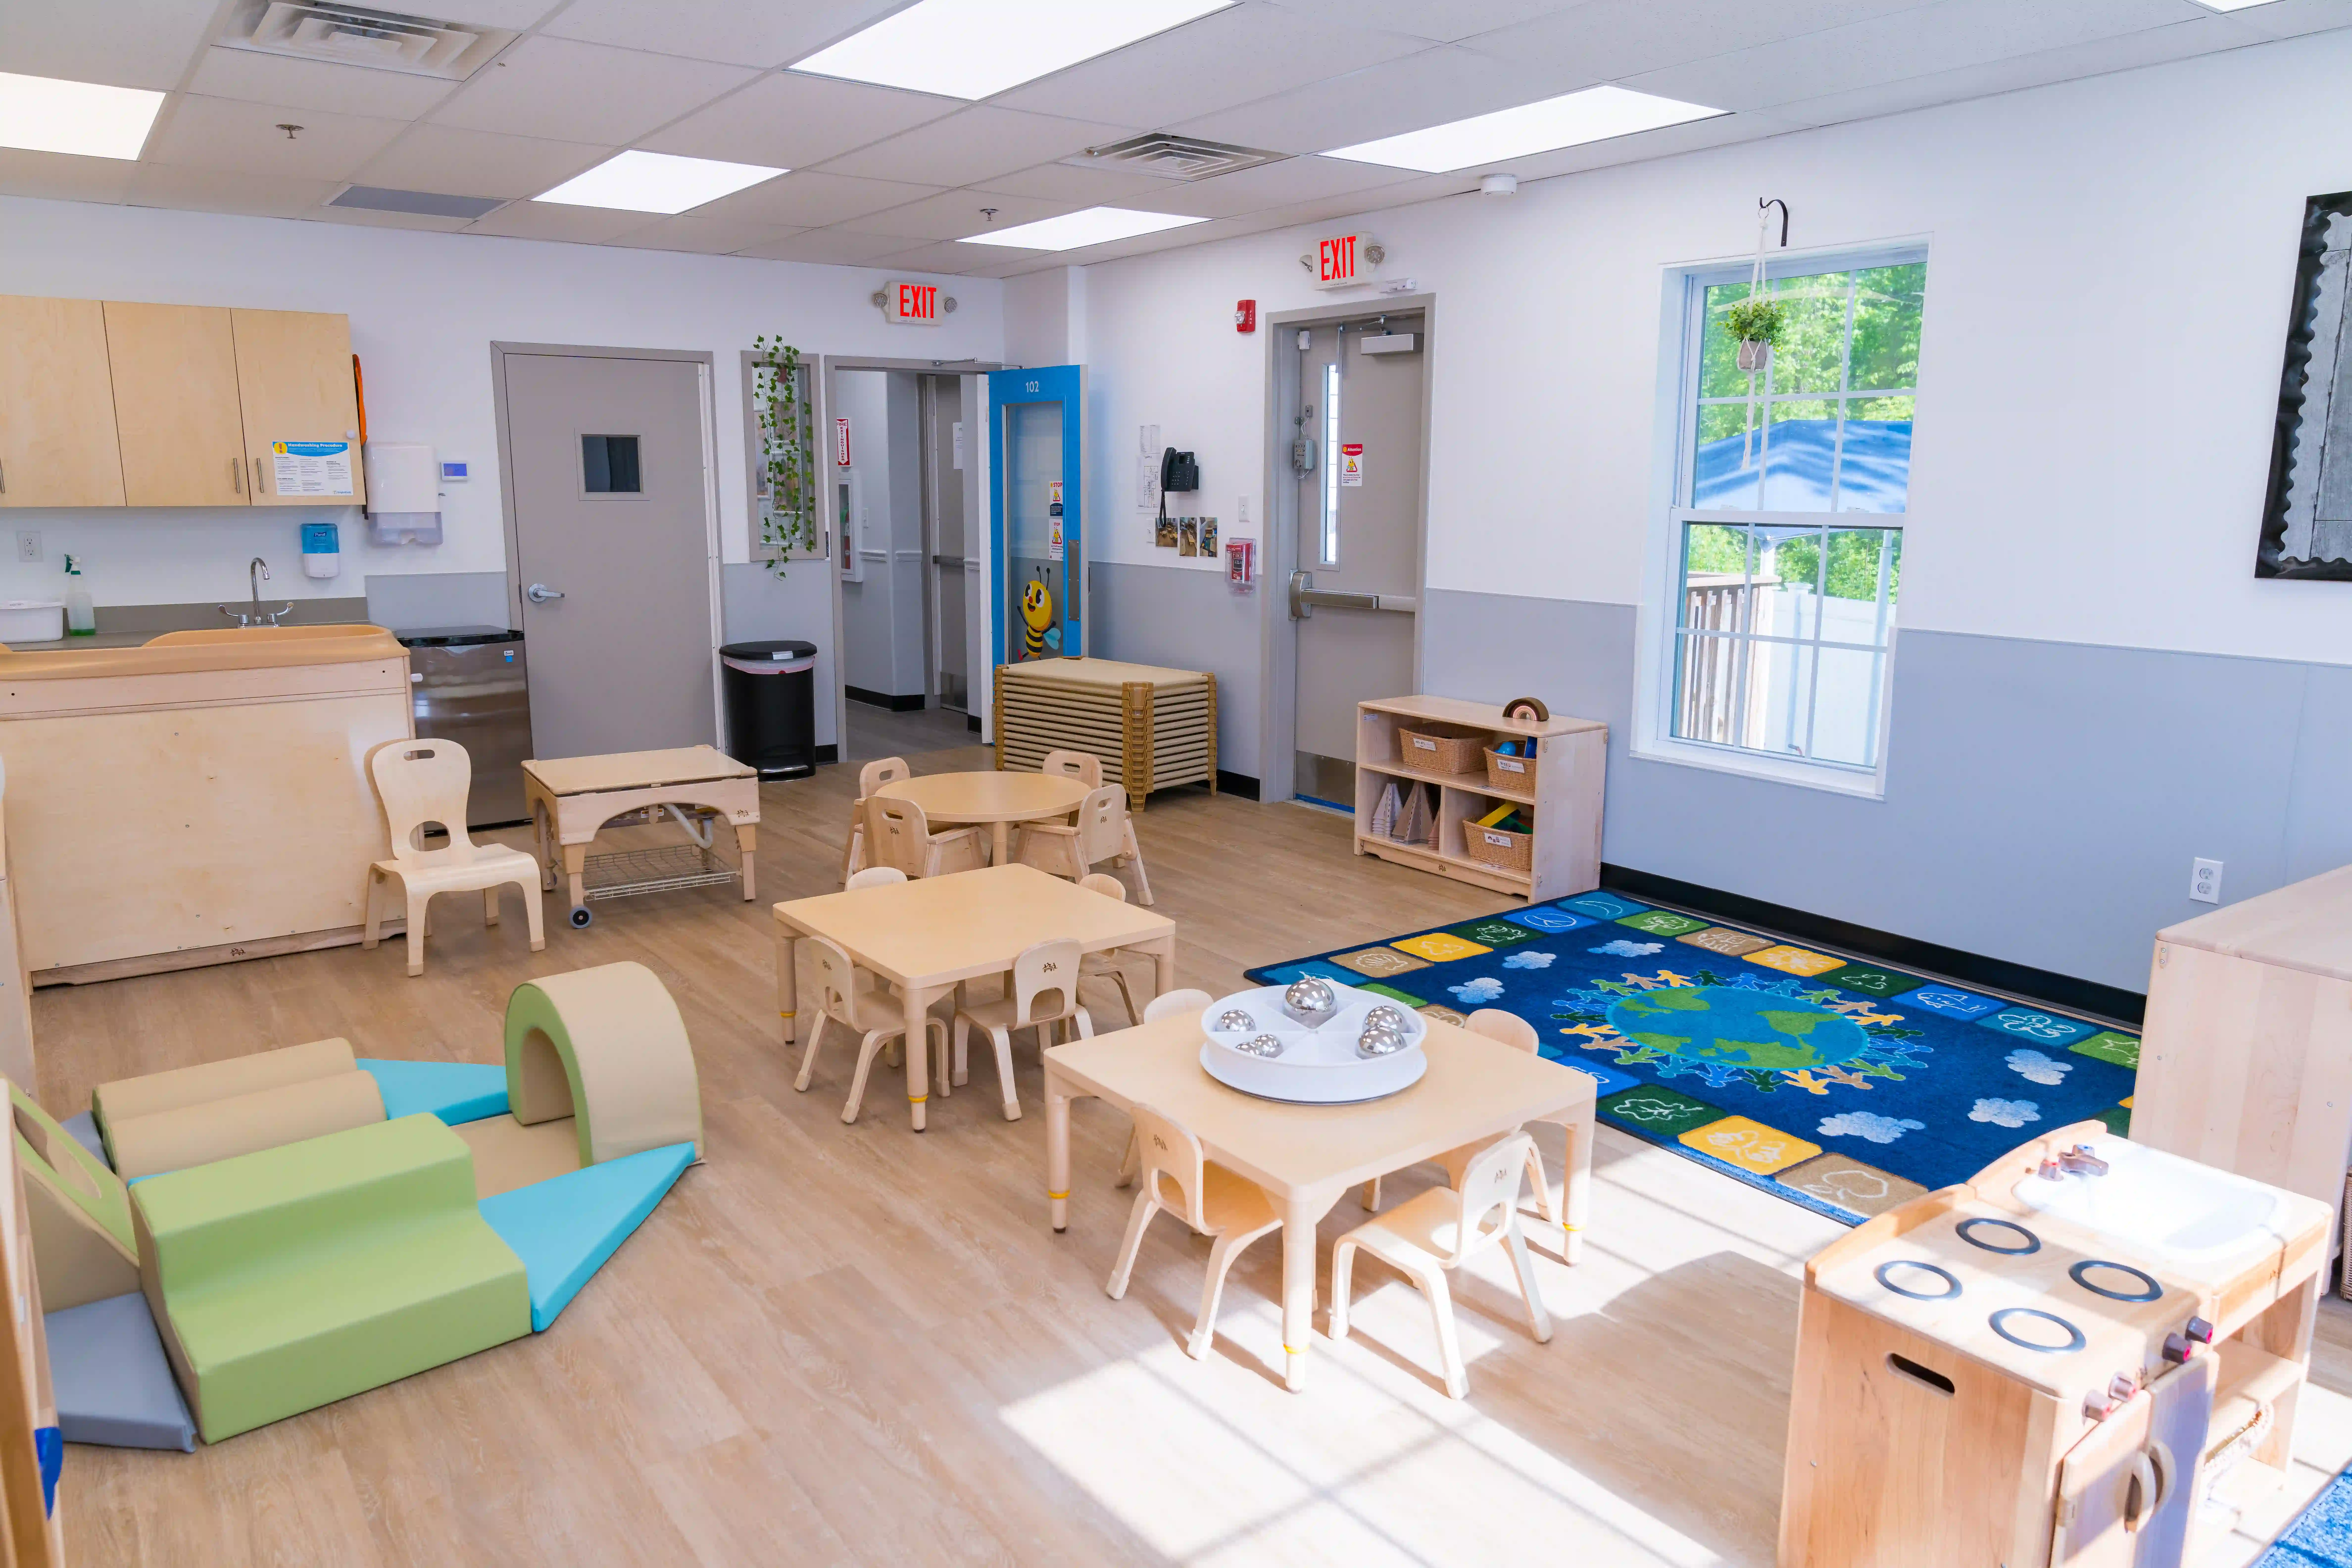 A cozy reading nook inside BrightPath Child Care Center, illustrating the center's commitment to cognitive development.